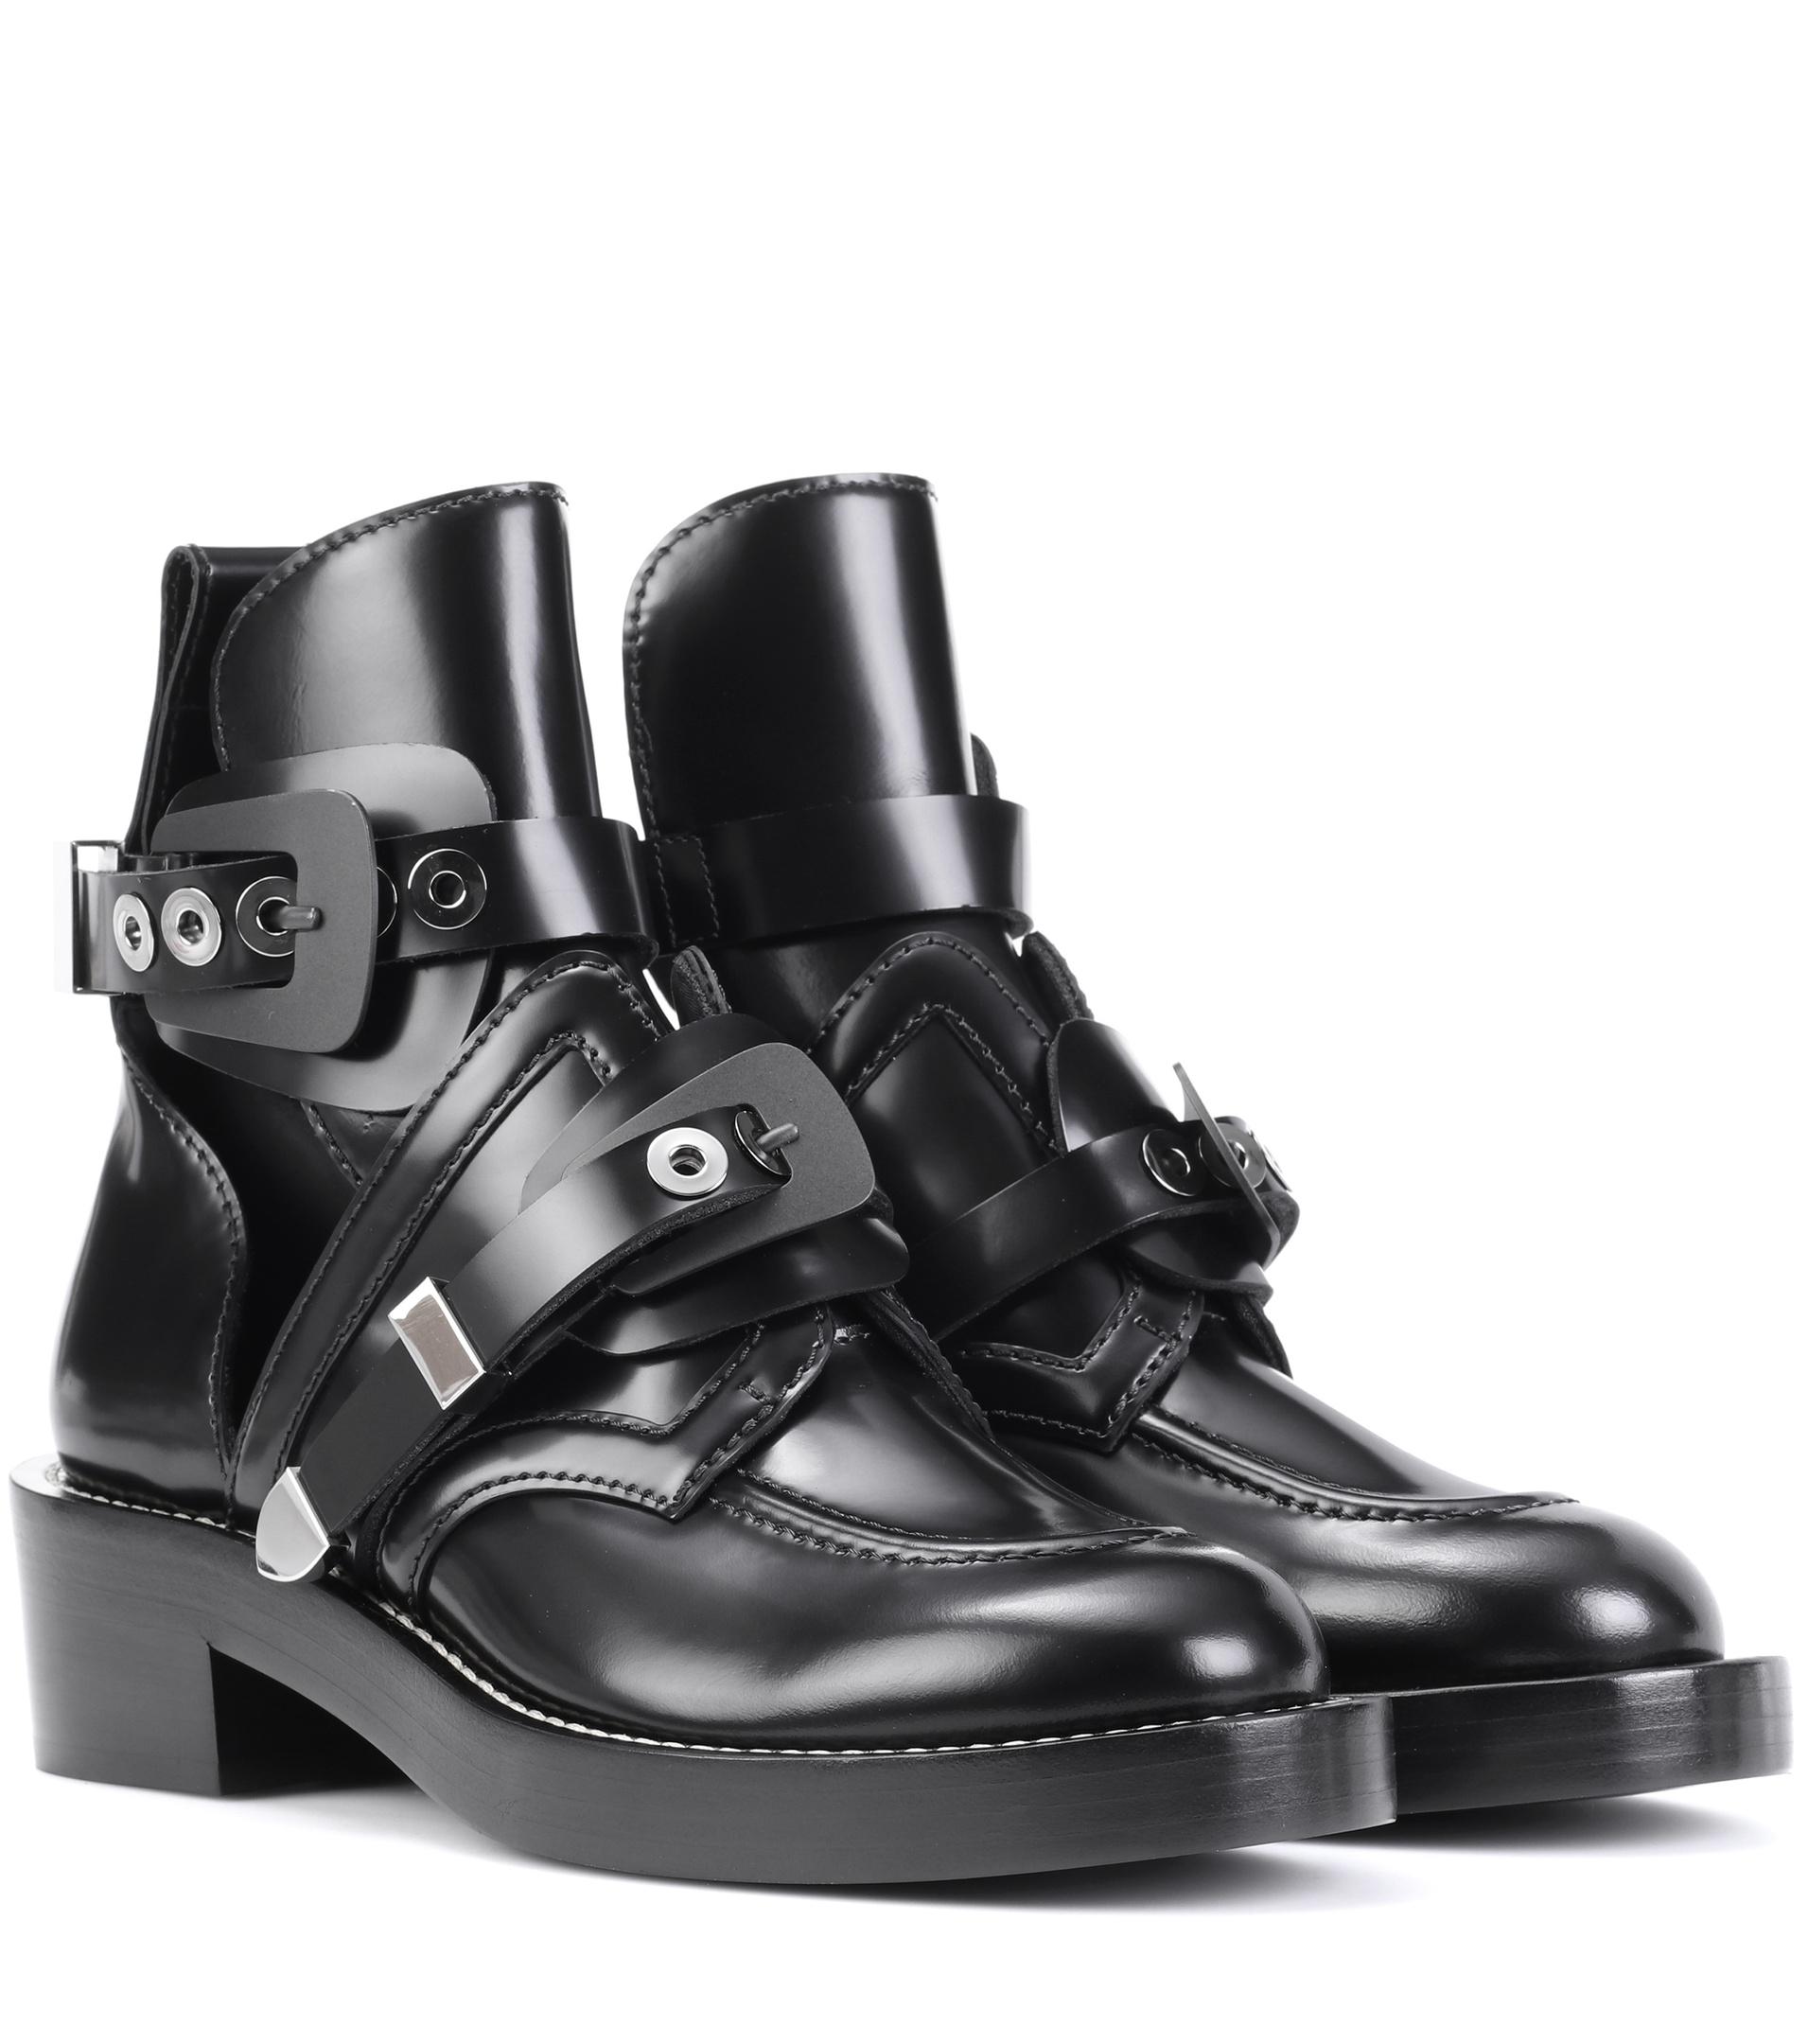 Balenciaga Ceinture Leather Ankle Boots in Black - Lyst